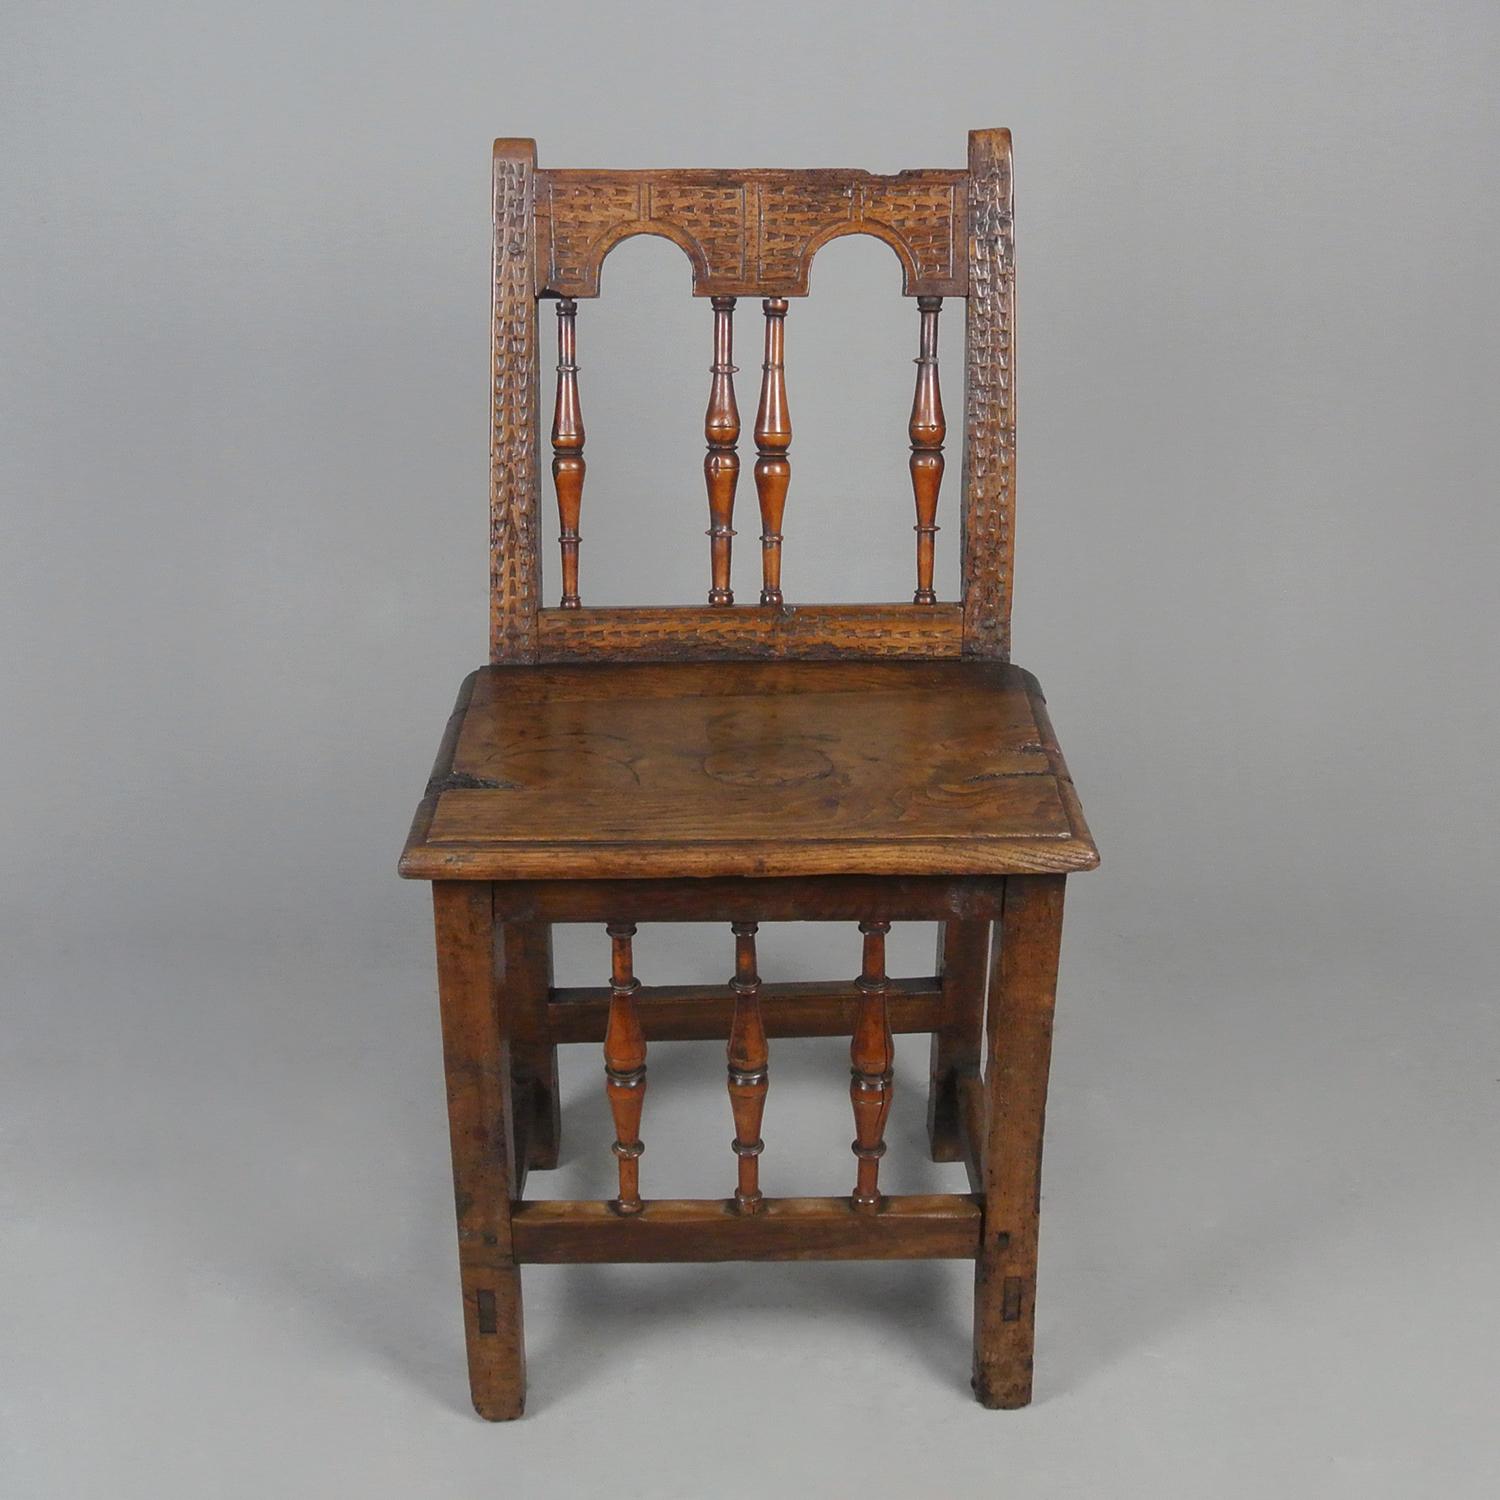 Rare and Beautiful Walnut and Yew Spindle 'Back Stool' Chair c. 1600 In Good Condition For Sale In Heathfield, GB